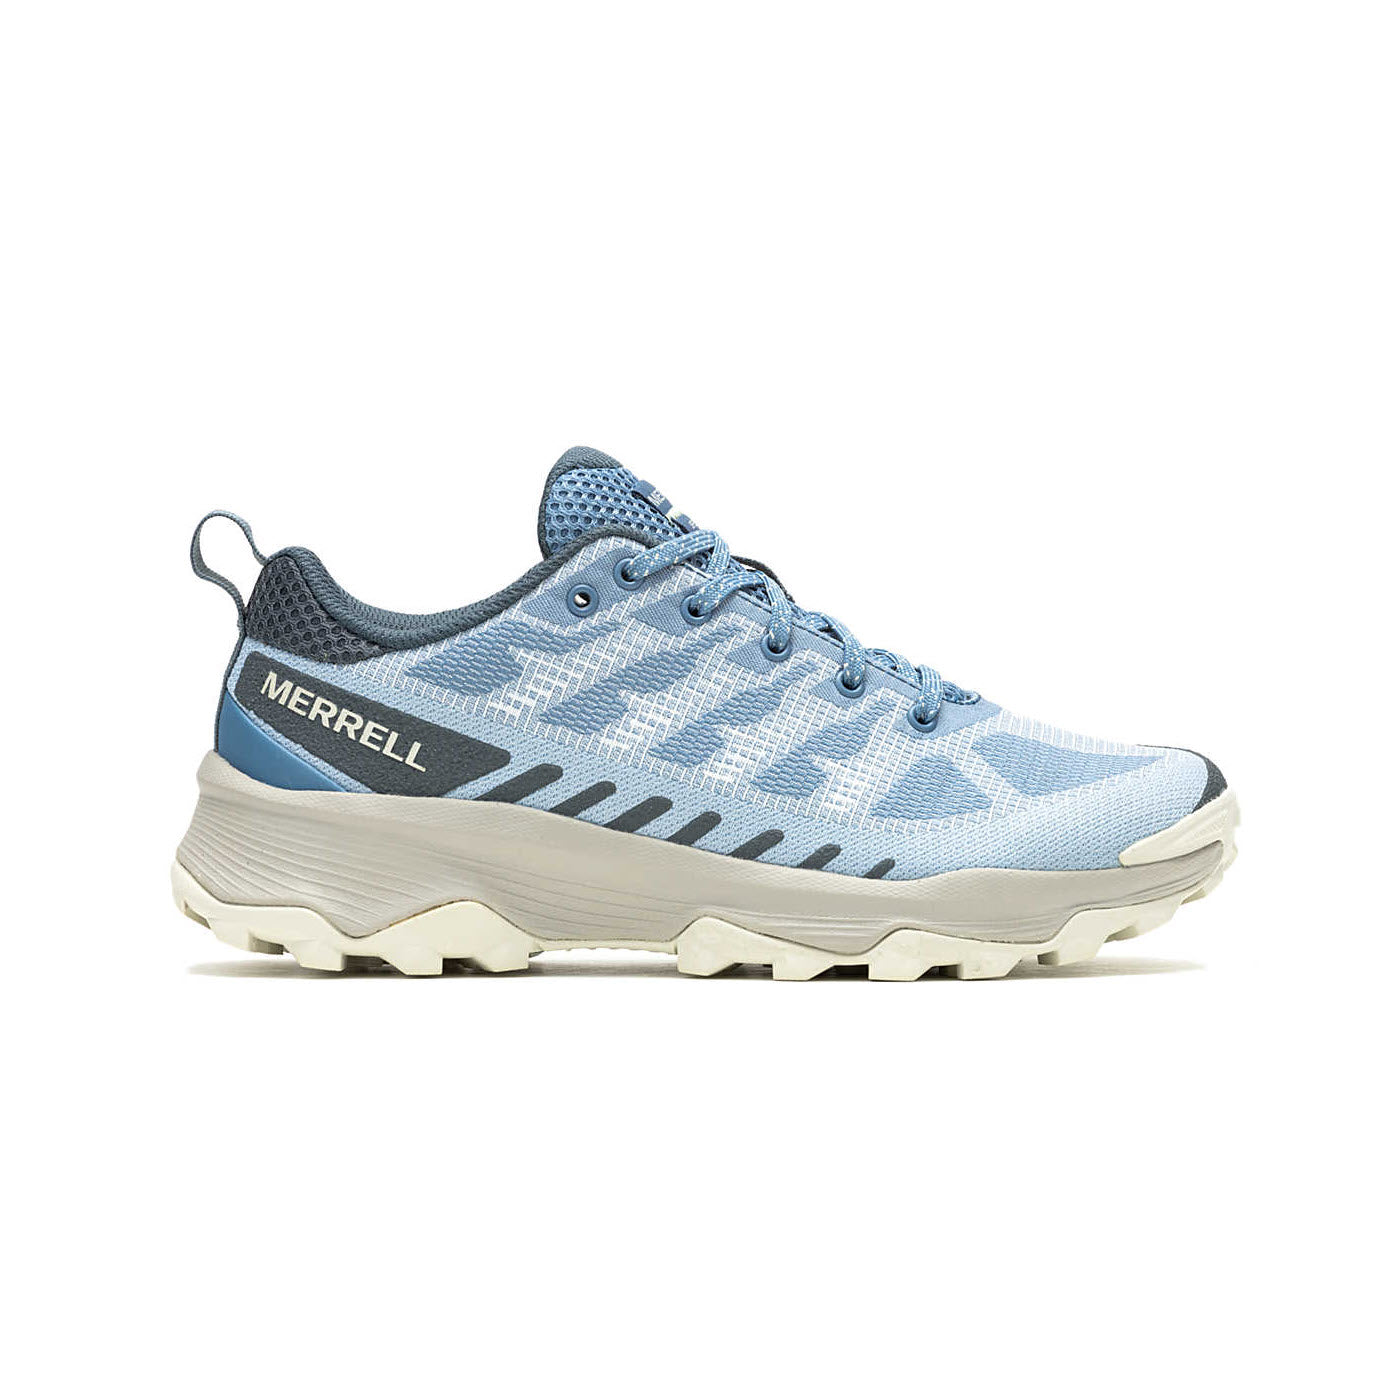 A blue Merrell Speed Eco Chambray hiking shoe with a recycled rubber outsole, featuring the Merrell brand name on the heel and a lace-up front.